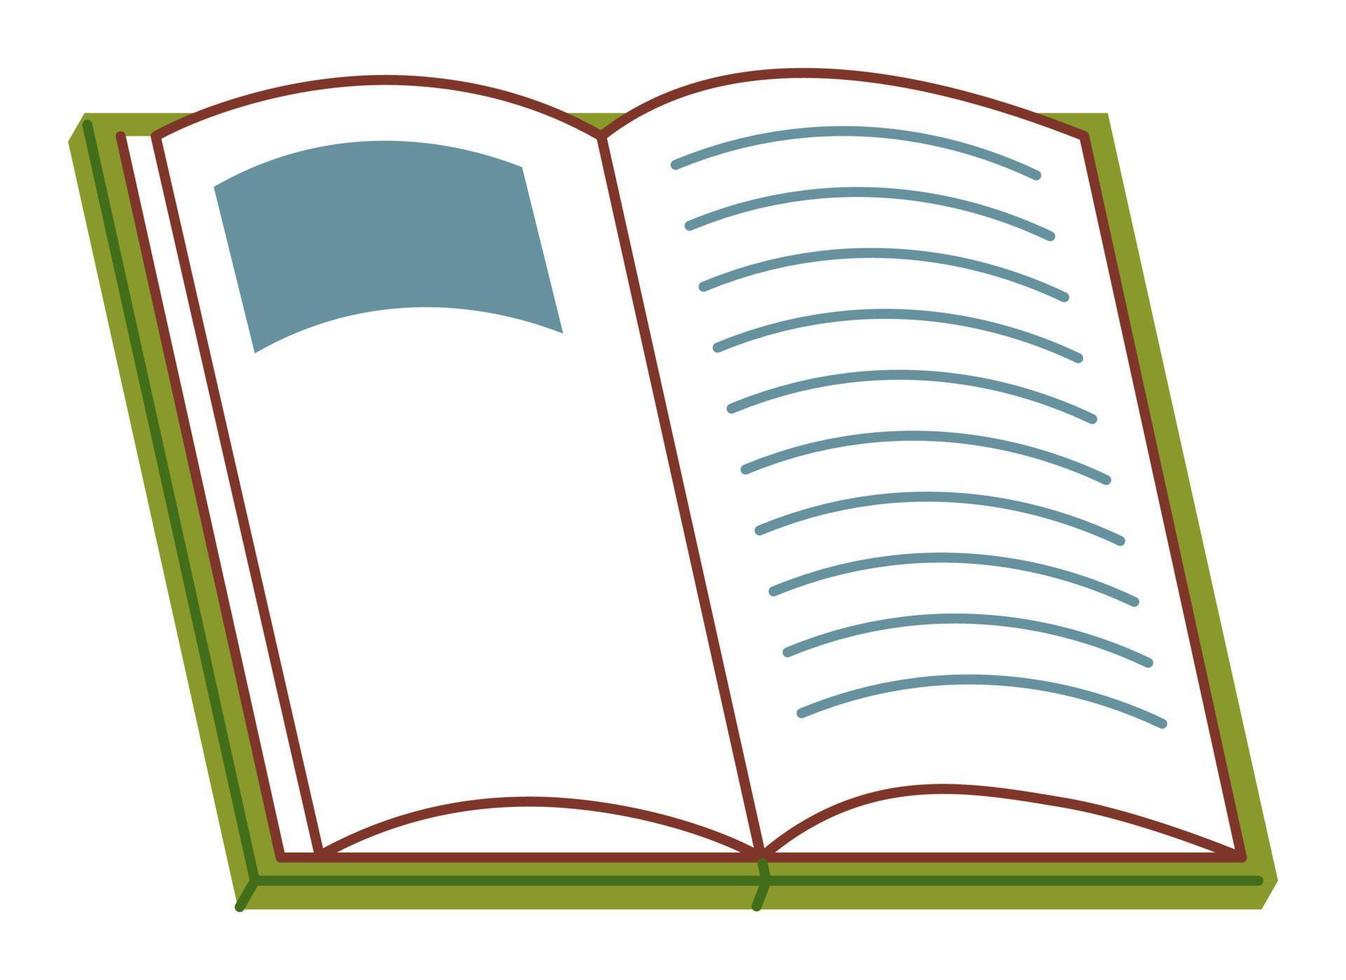 School textbook with text and picture, learning vector